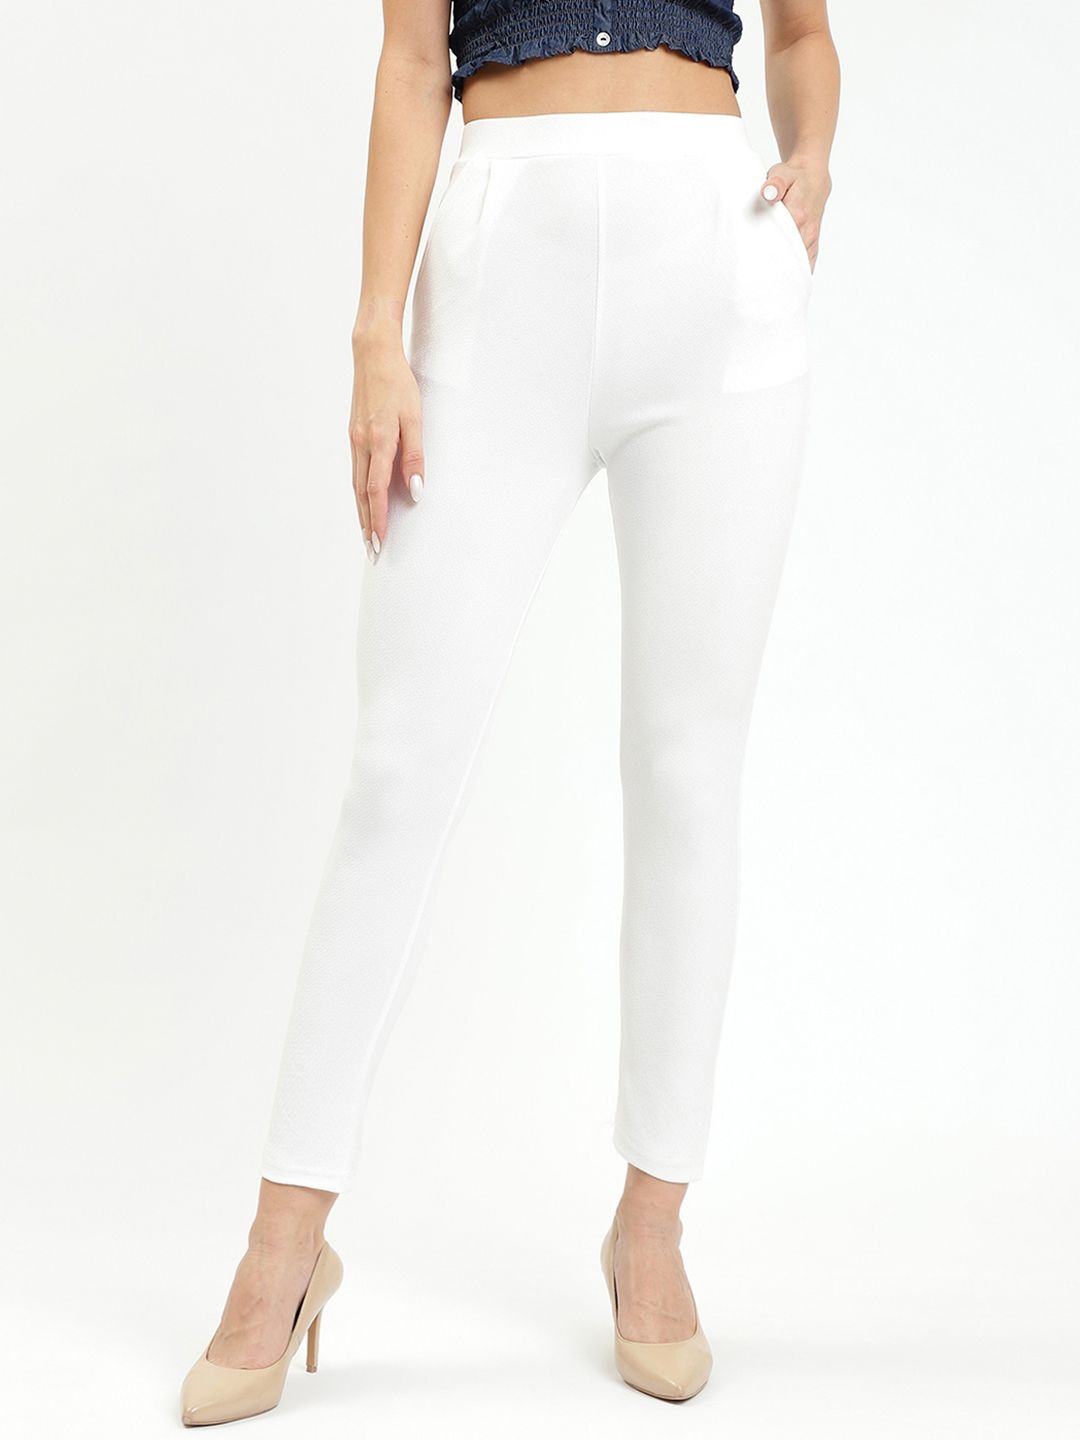 BAESD Women White Slim Fit Wrinkle Free Trousers Price in India